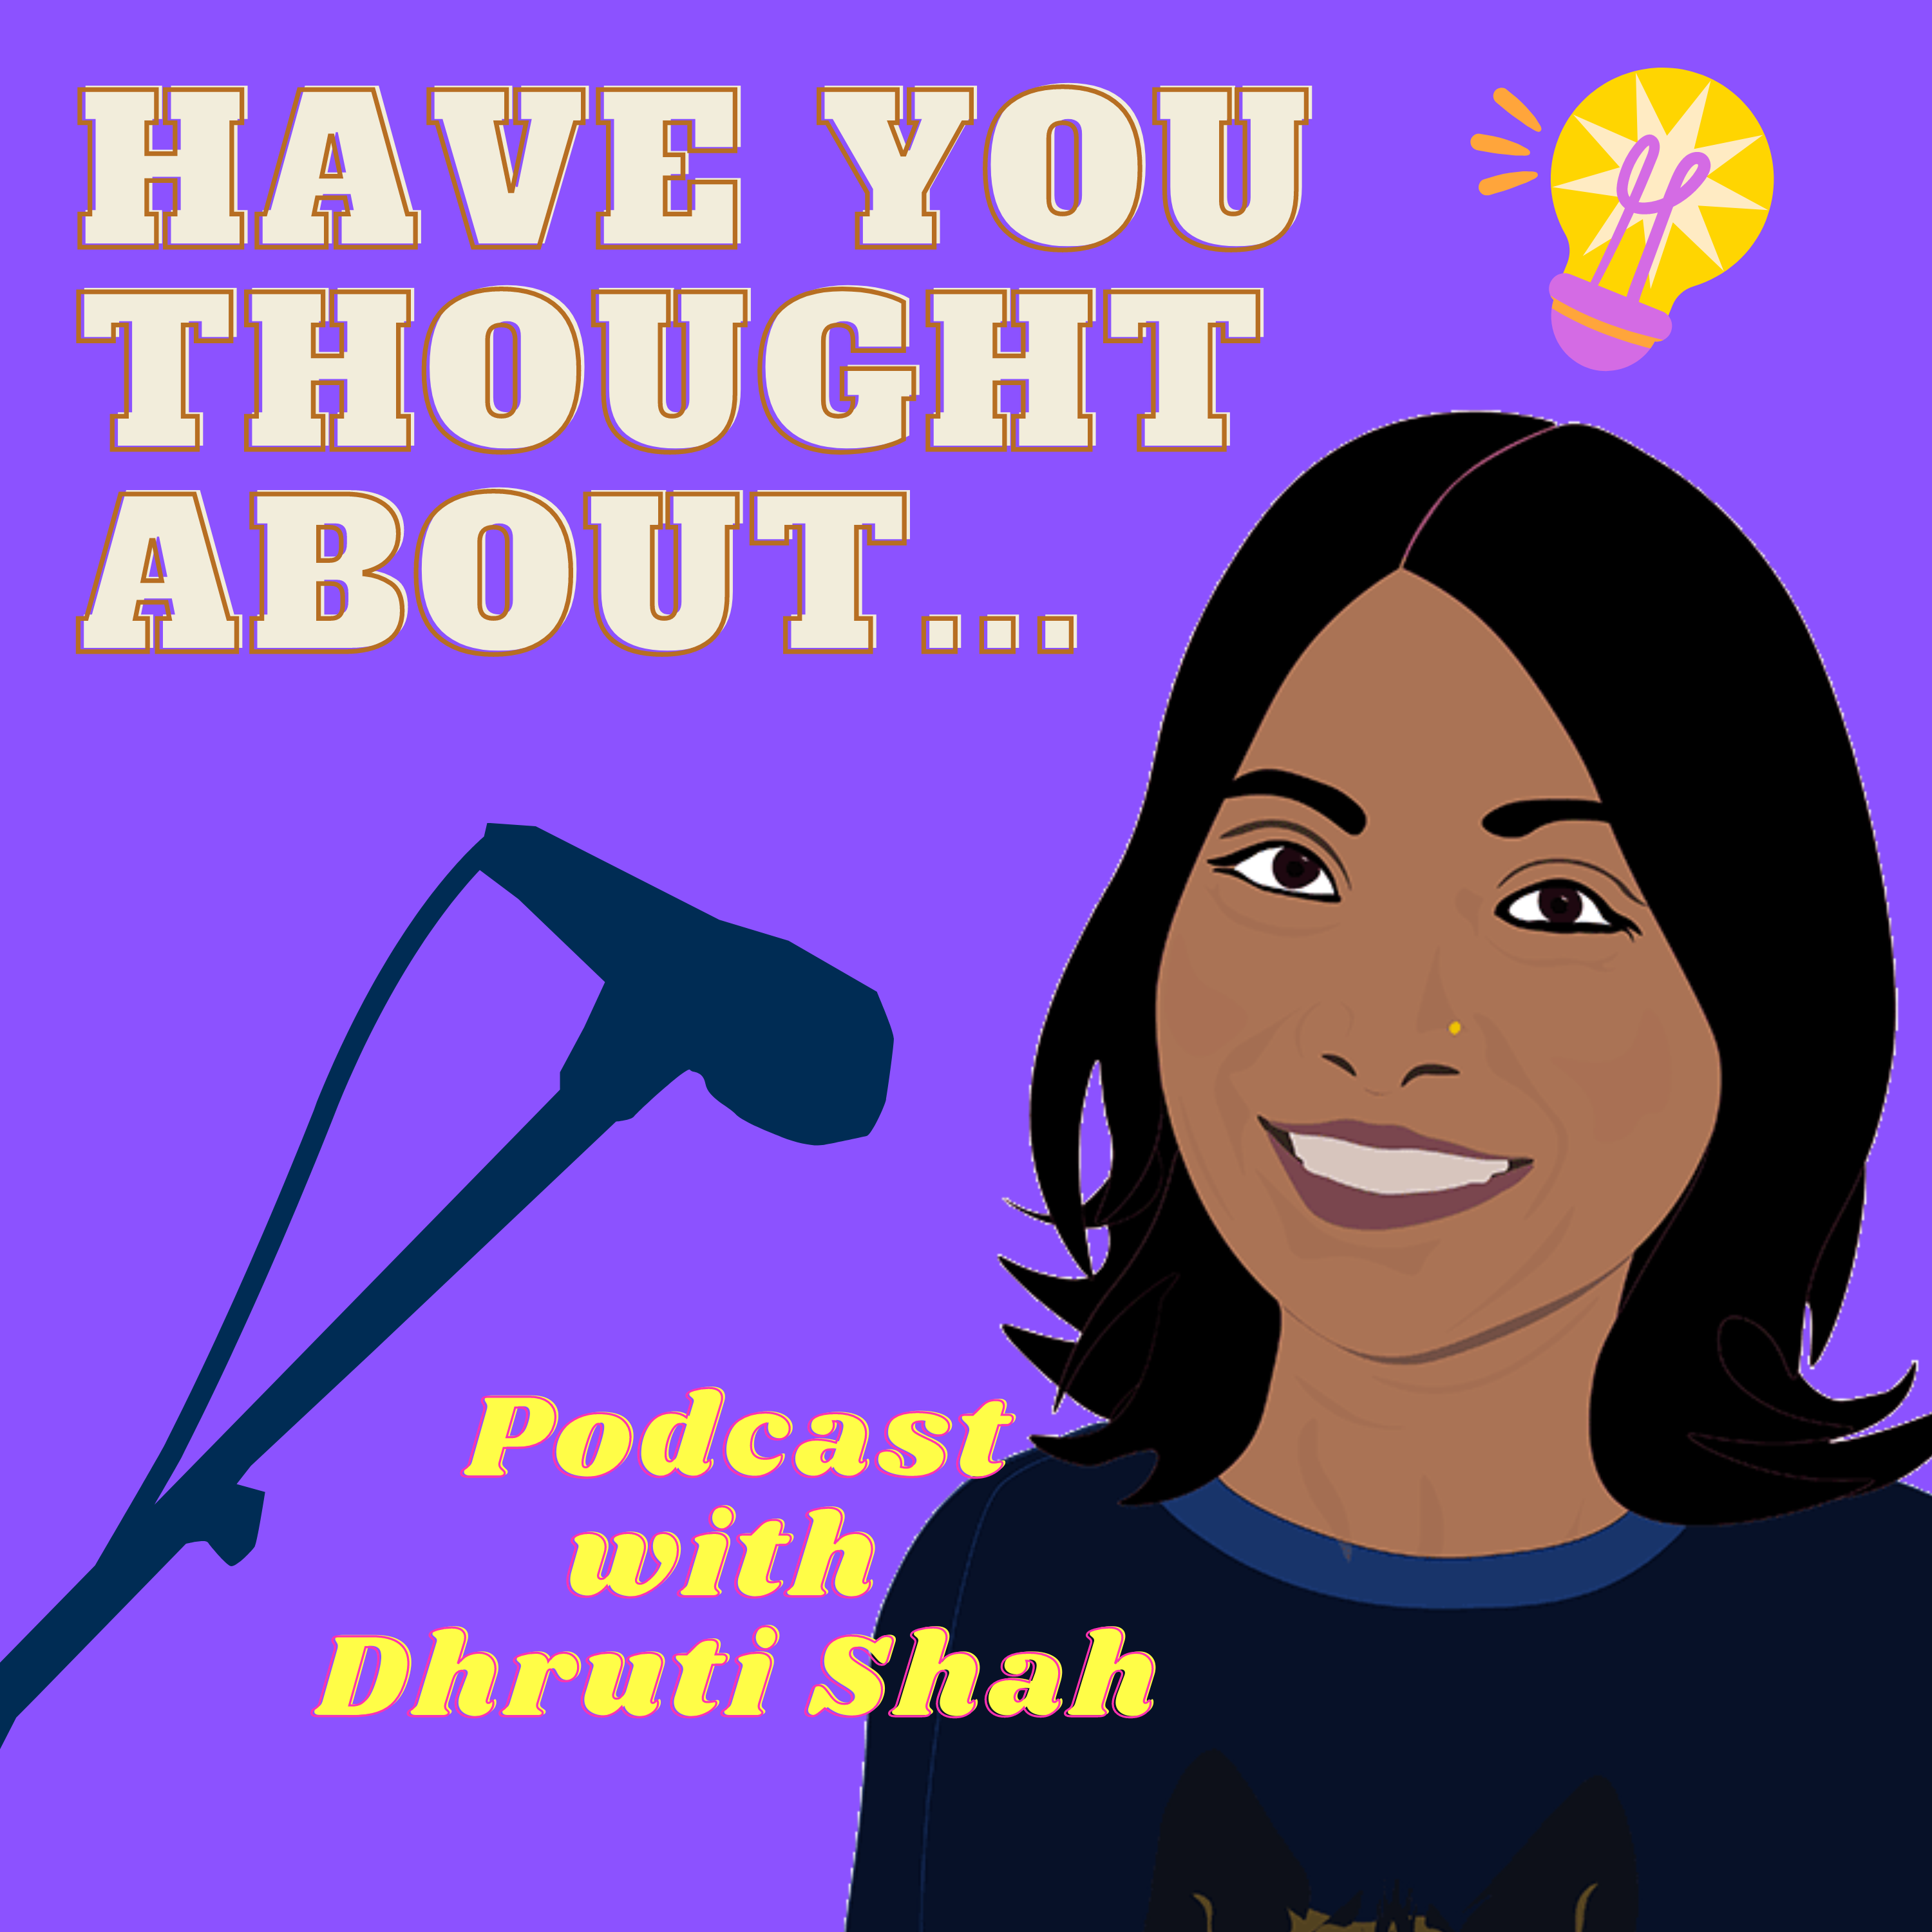 Dhruti Shah asks ‘Have you thought about…’